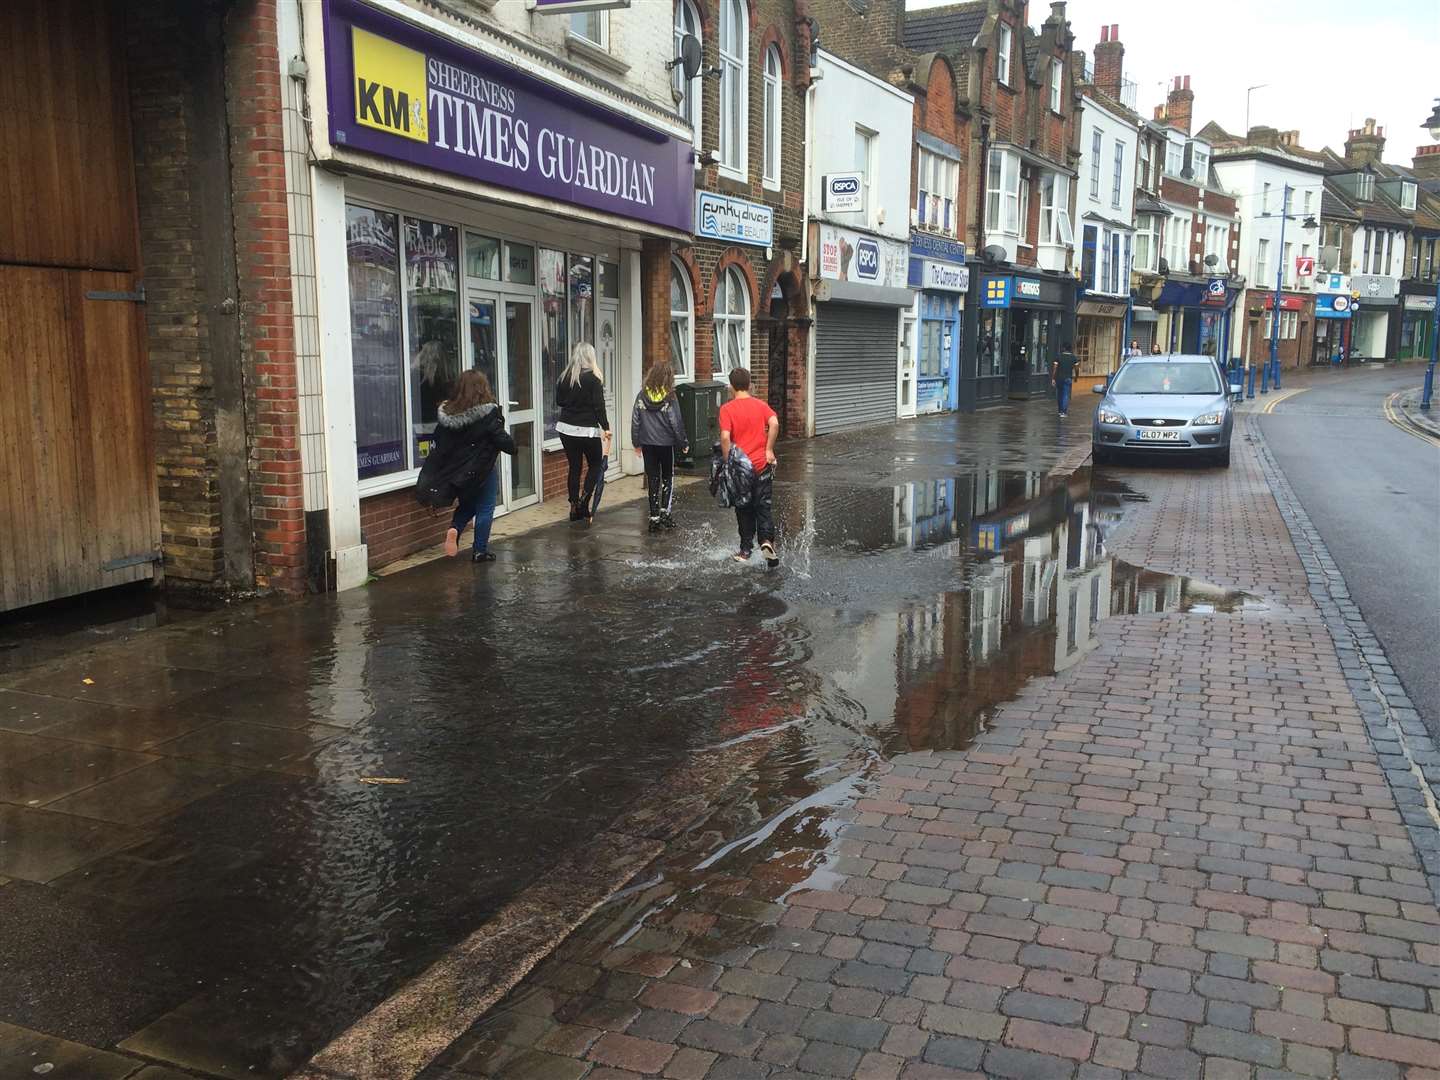 Flooded: June 2016 in Sheerness High Street (5960072)